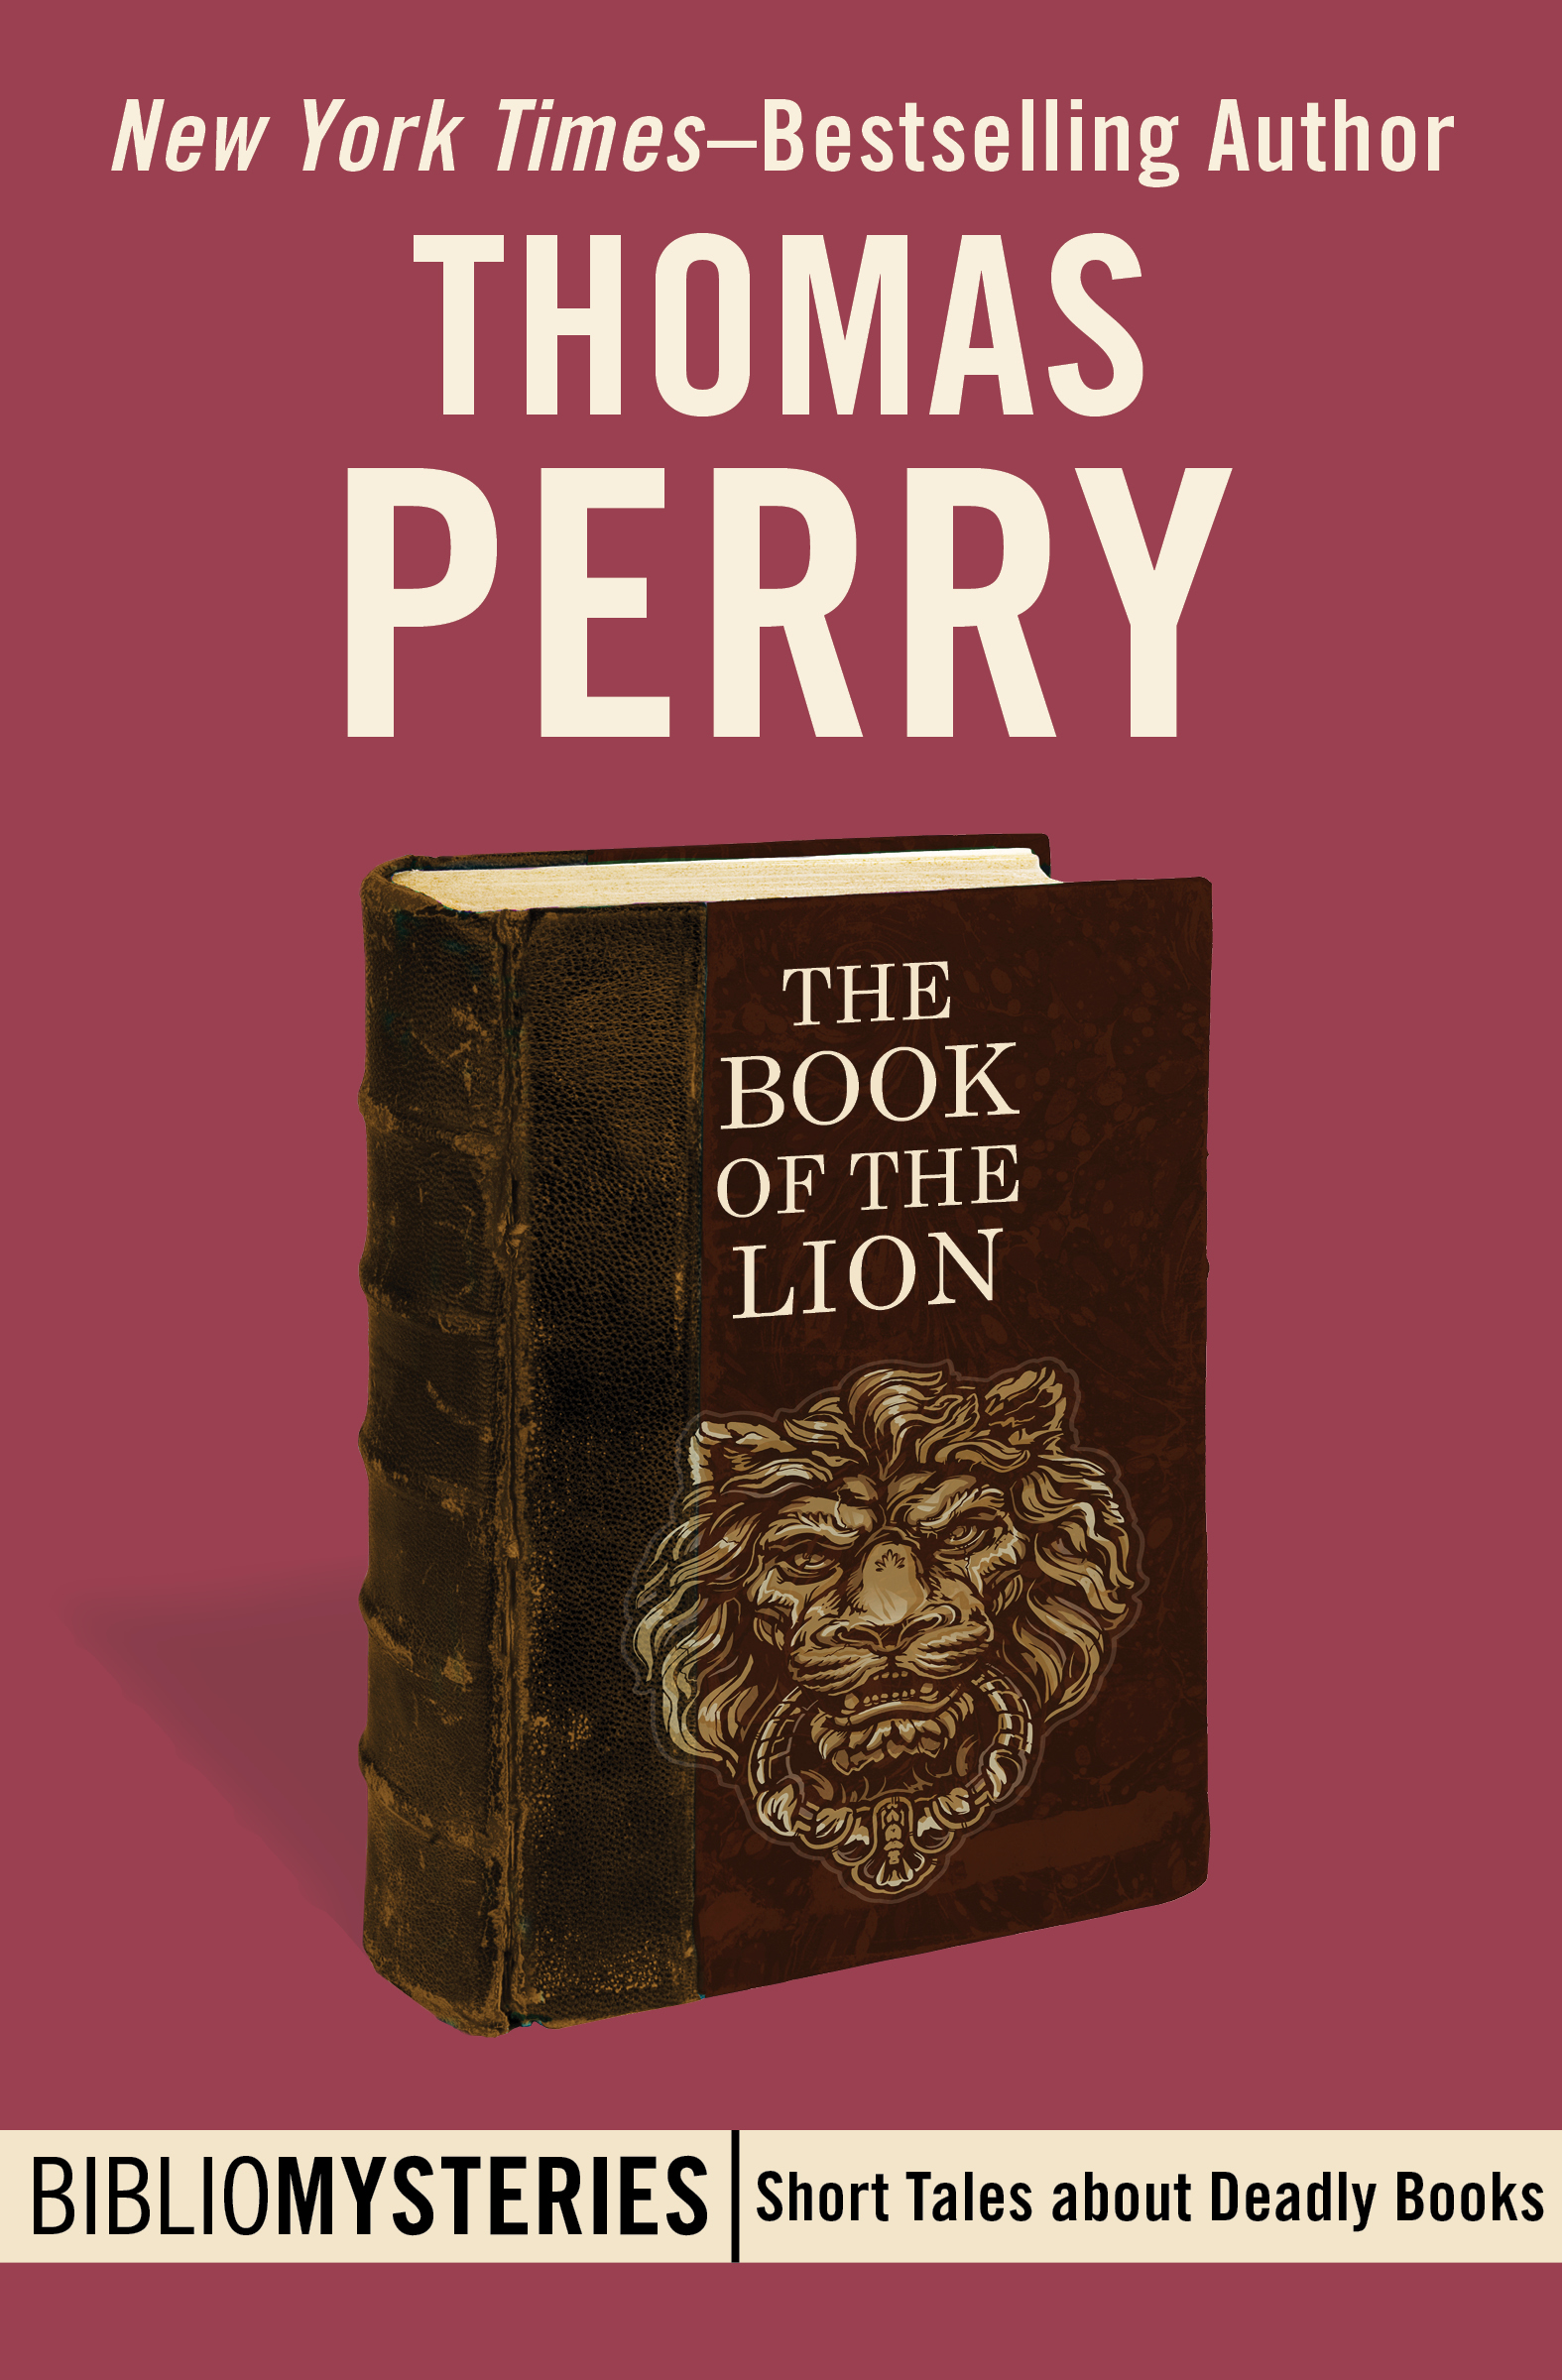 The Book of the Lion by Thomas Perry